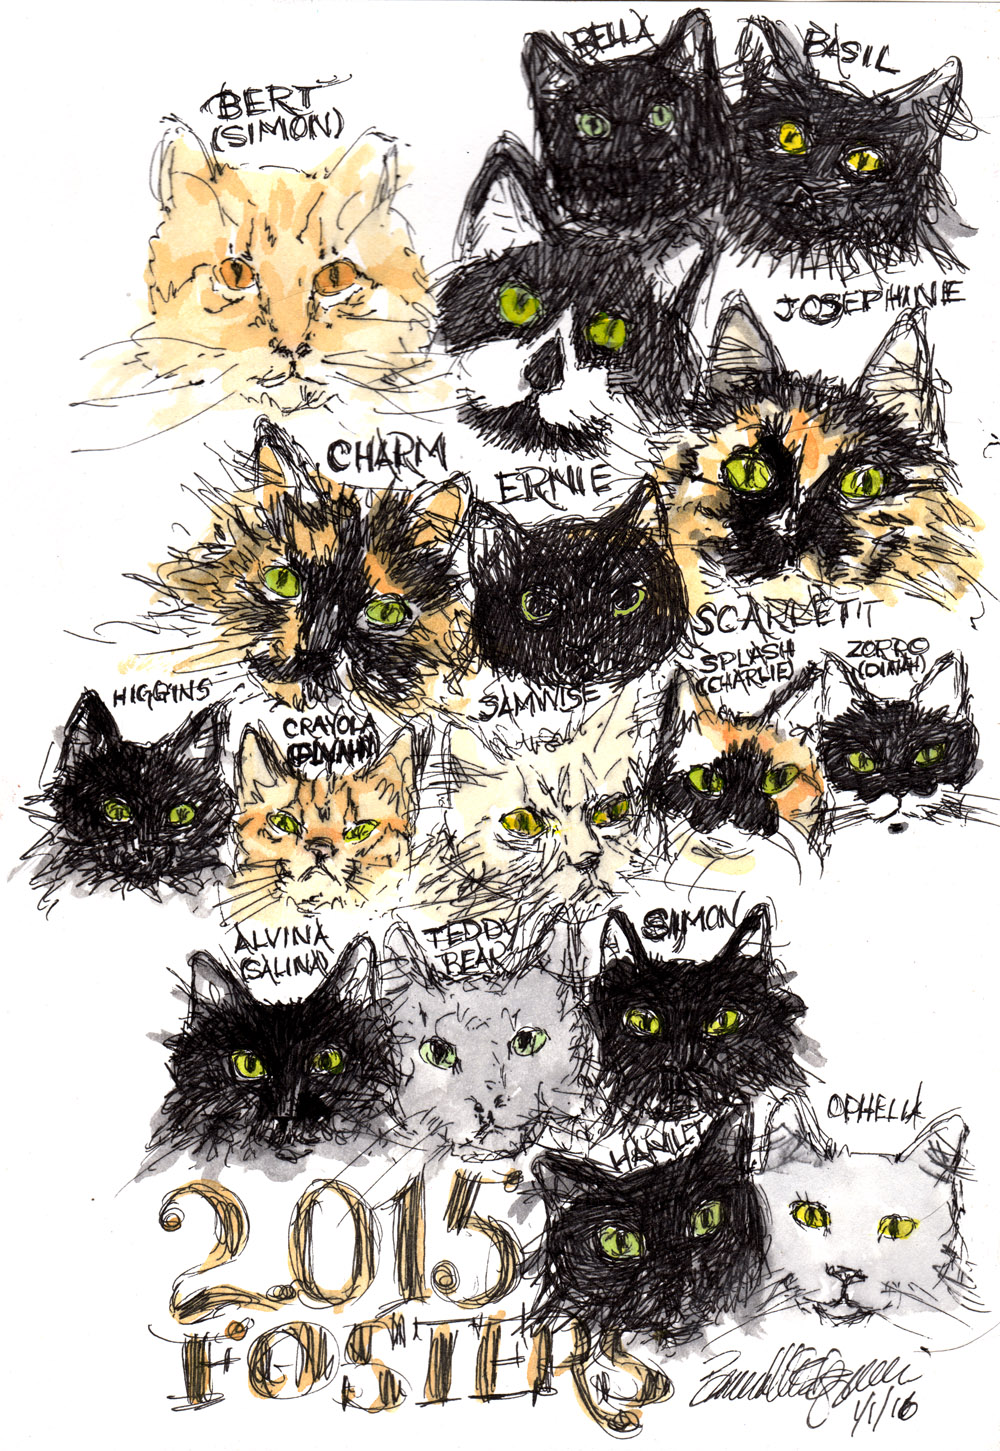 "2015 Foster Cats and Kittens", ink and watercolor, 9.6" x 6.5" © Bernadette E. Kazmarski